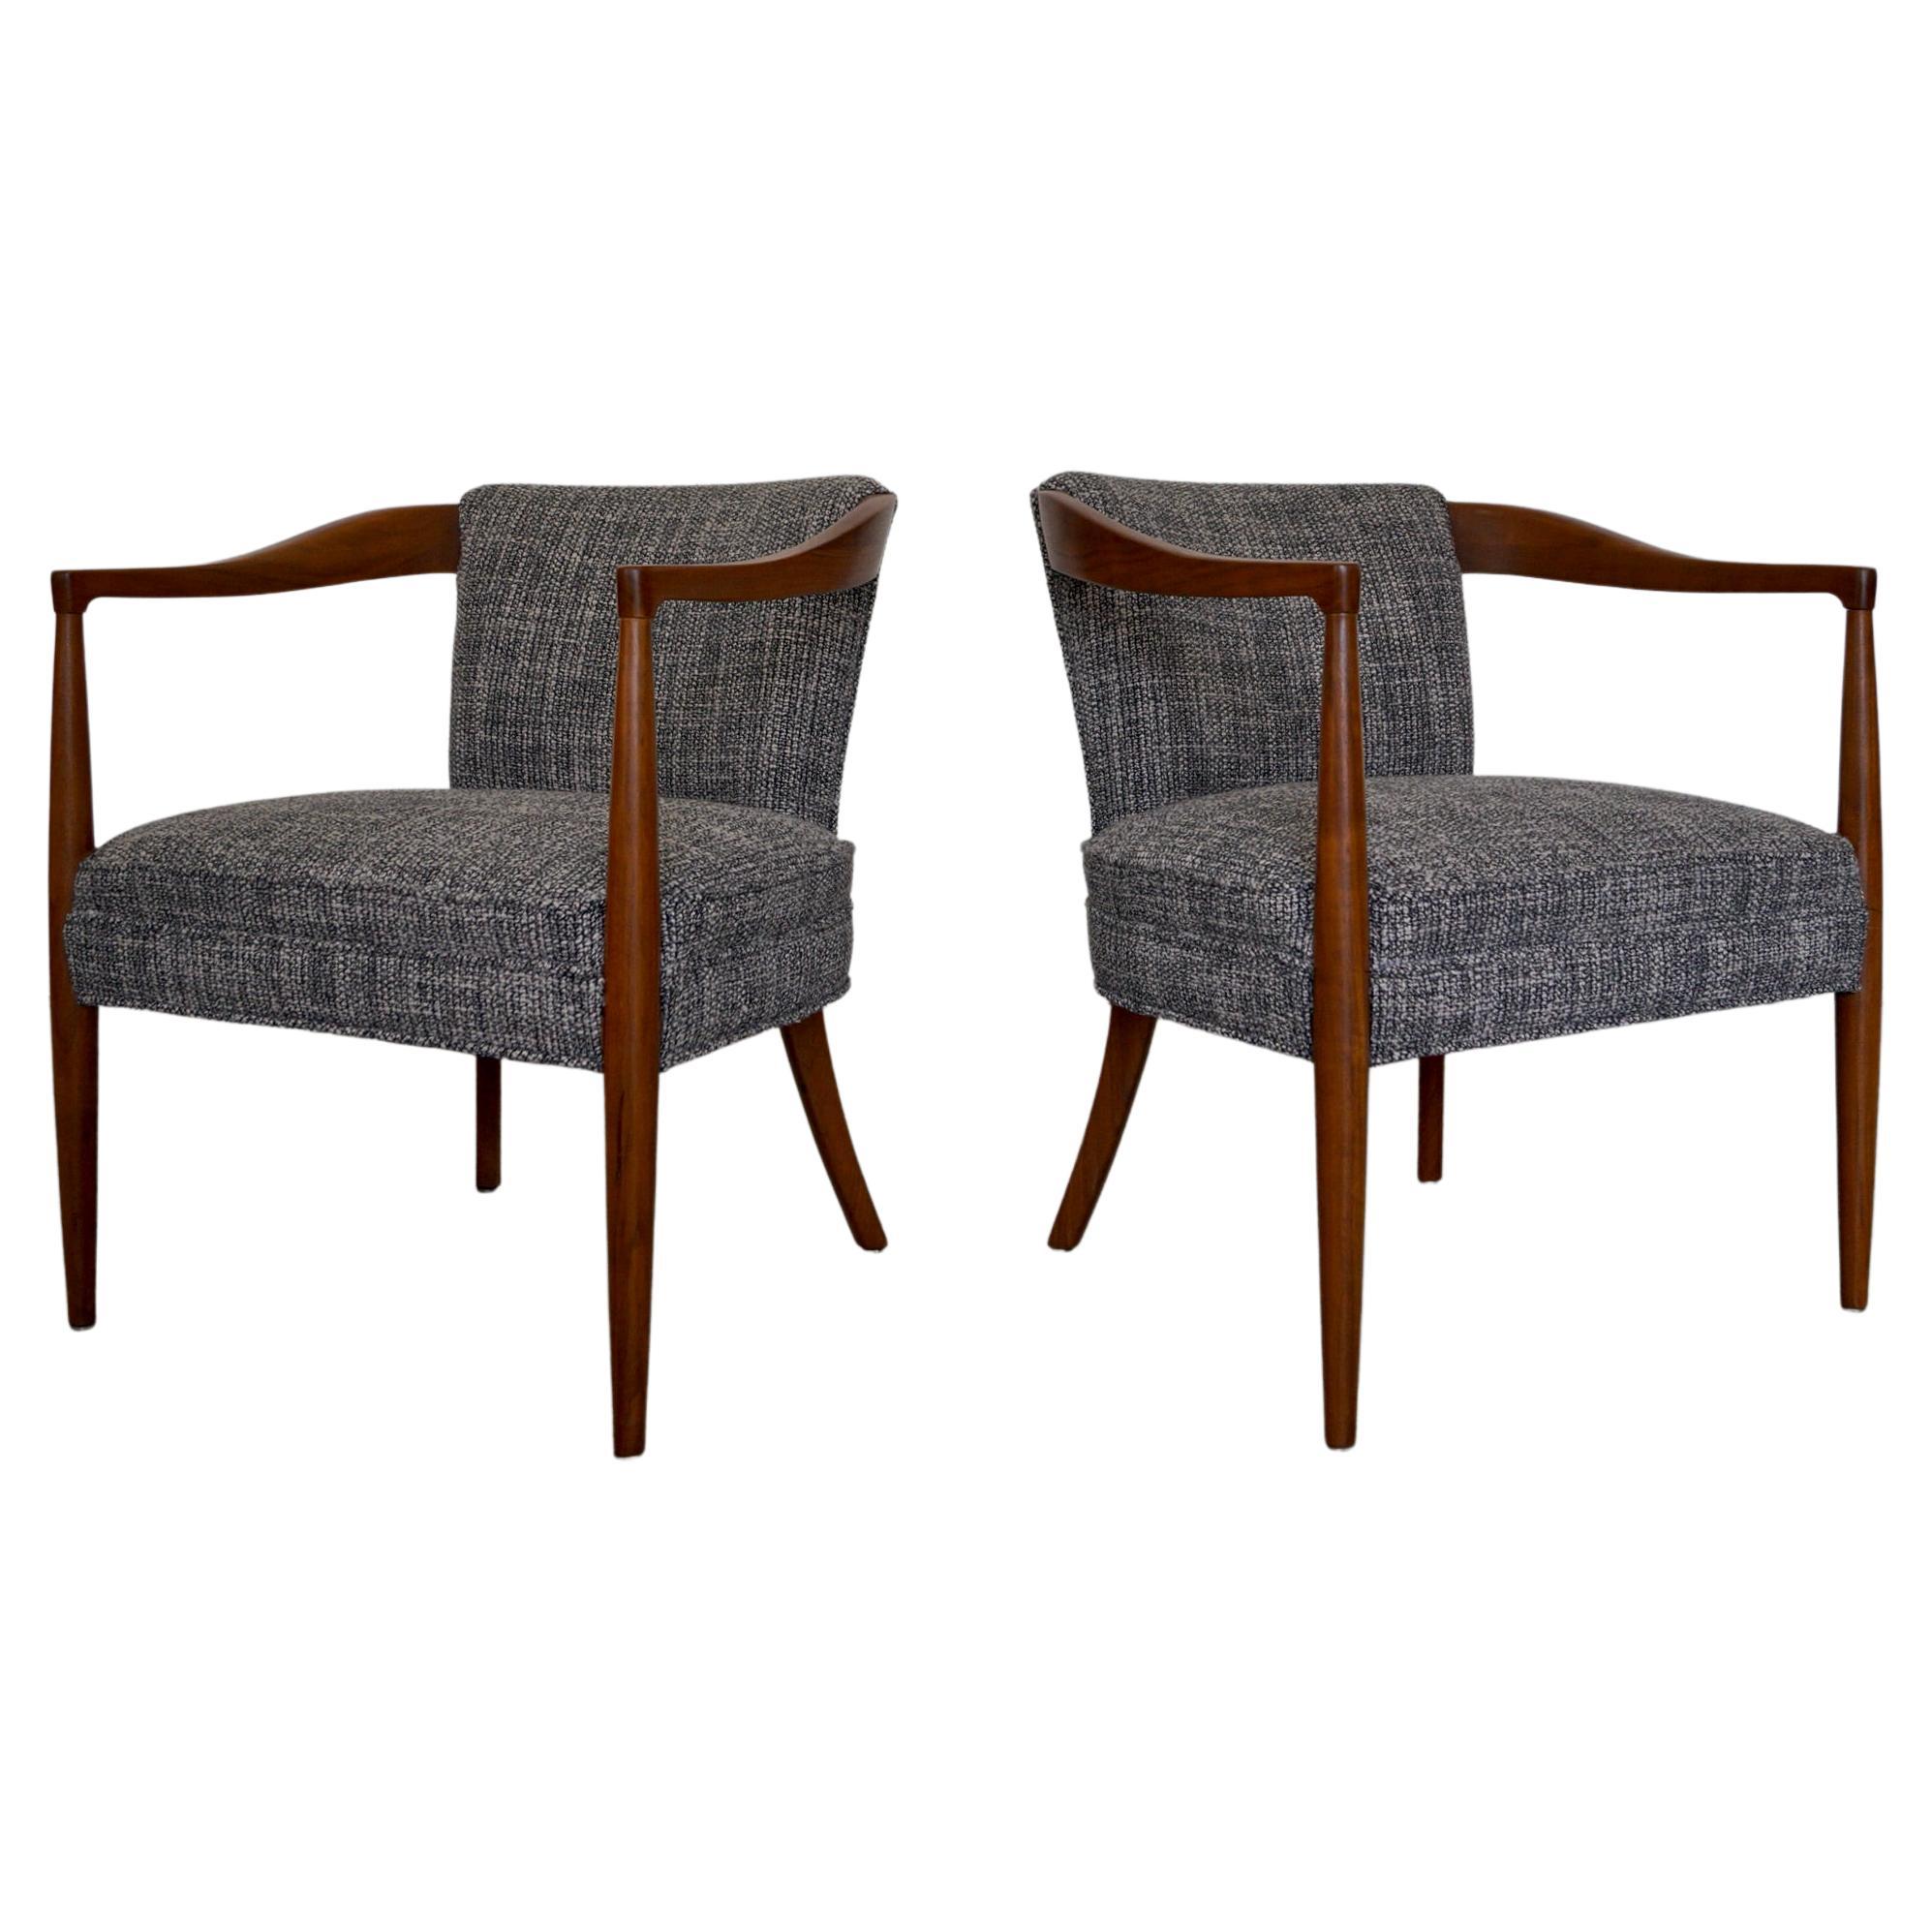 1950's Mid-Century Modern Walnut Armchairs, a Pair For Sale